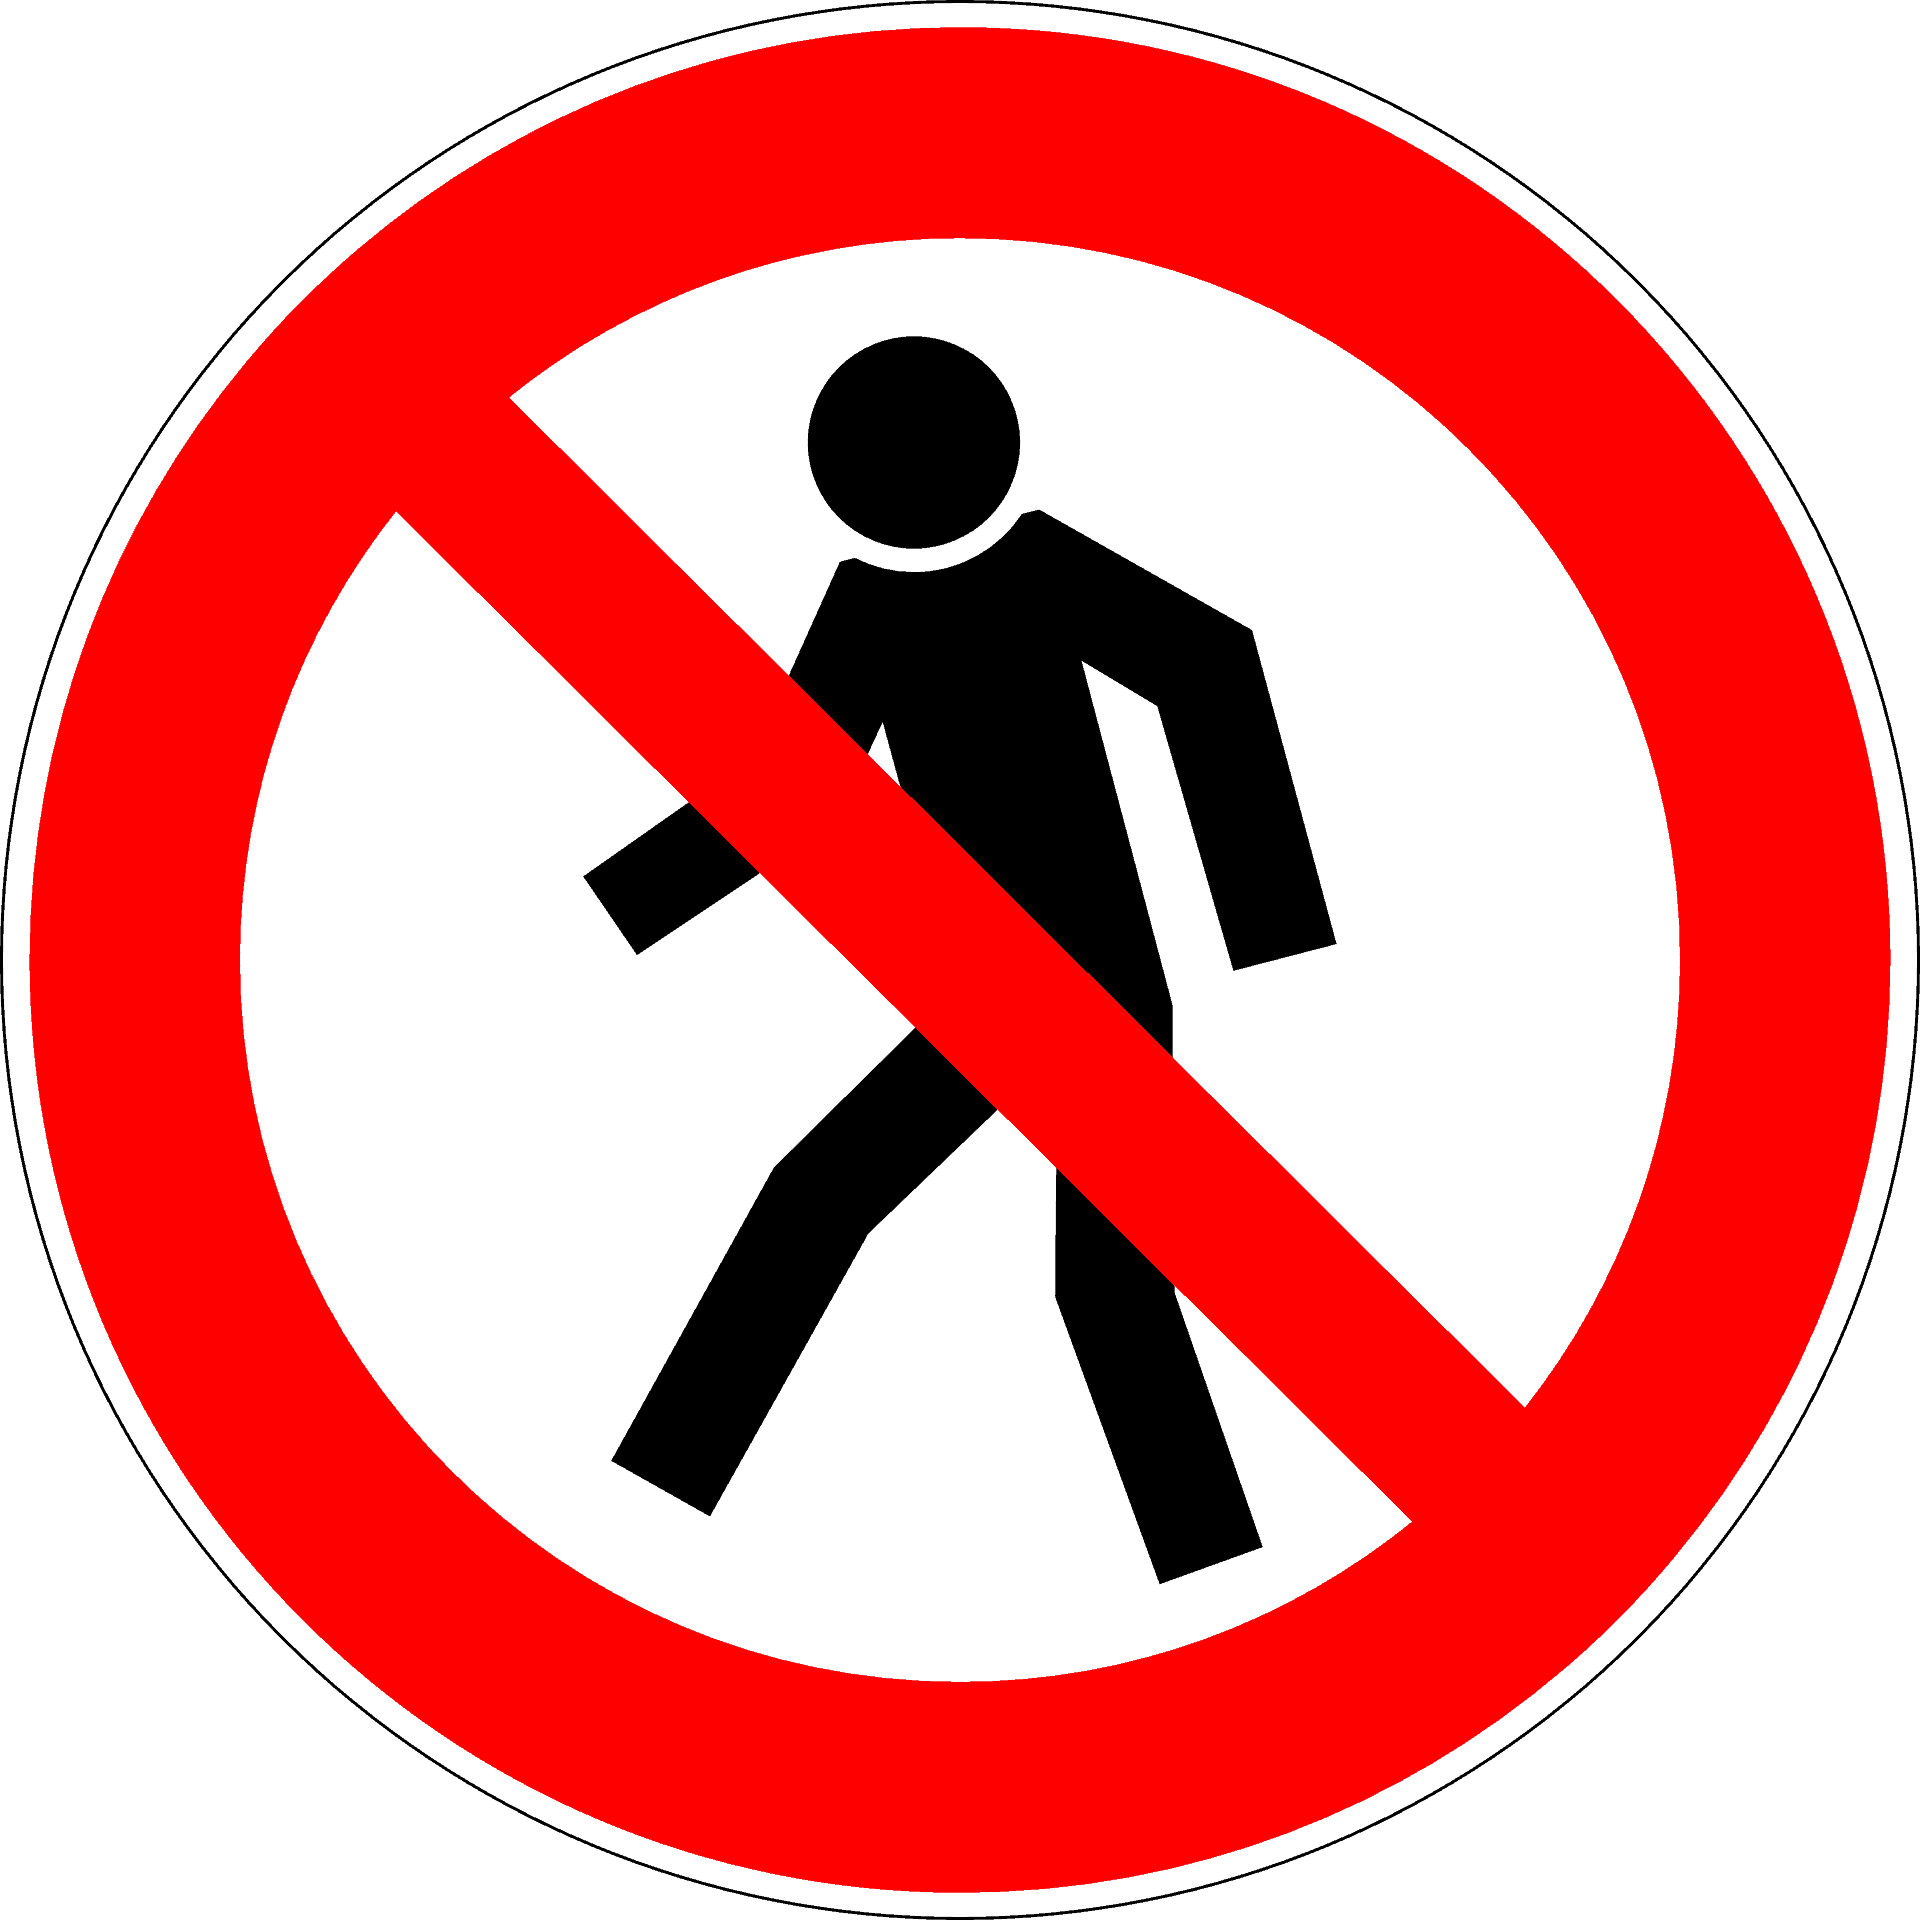 No Open Flame Sign Image - Open Flames Prohibited Sign (574x574)